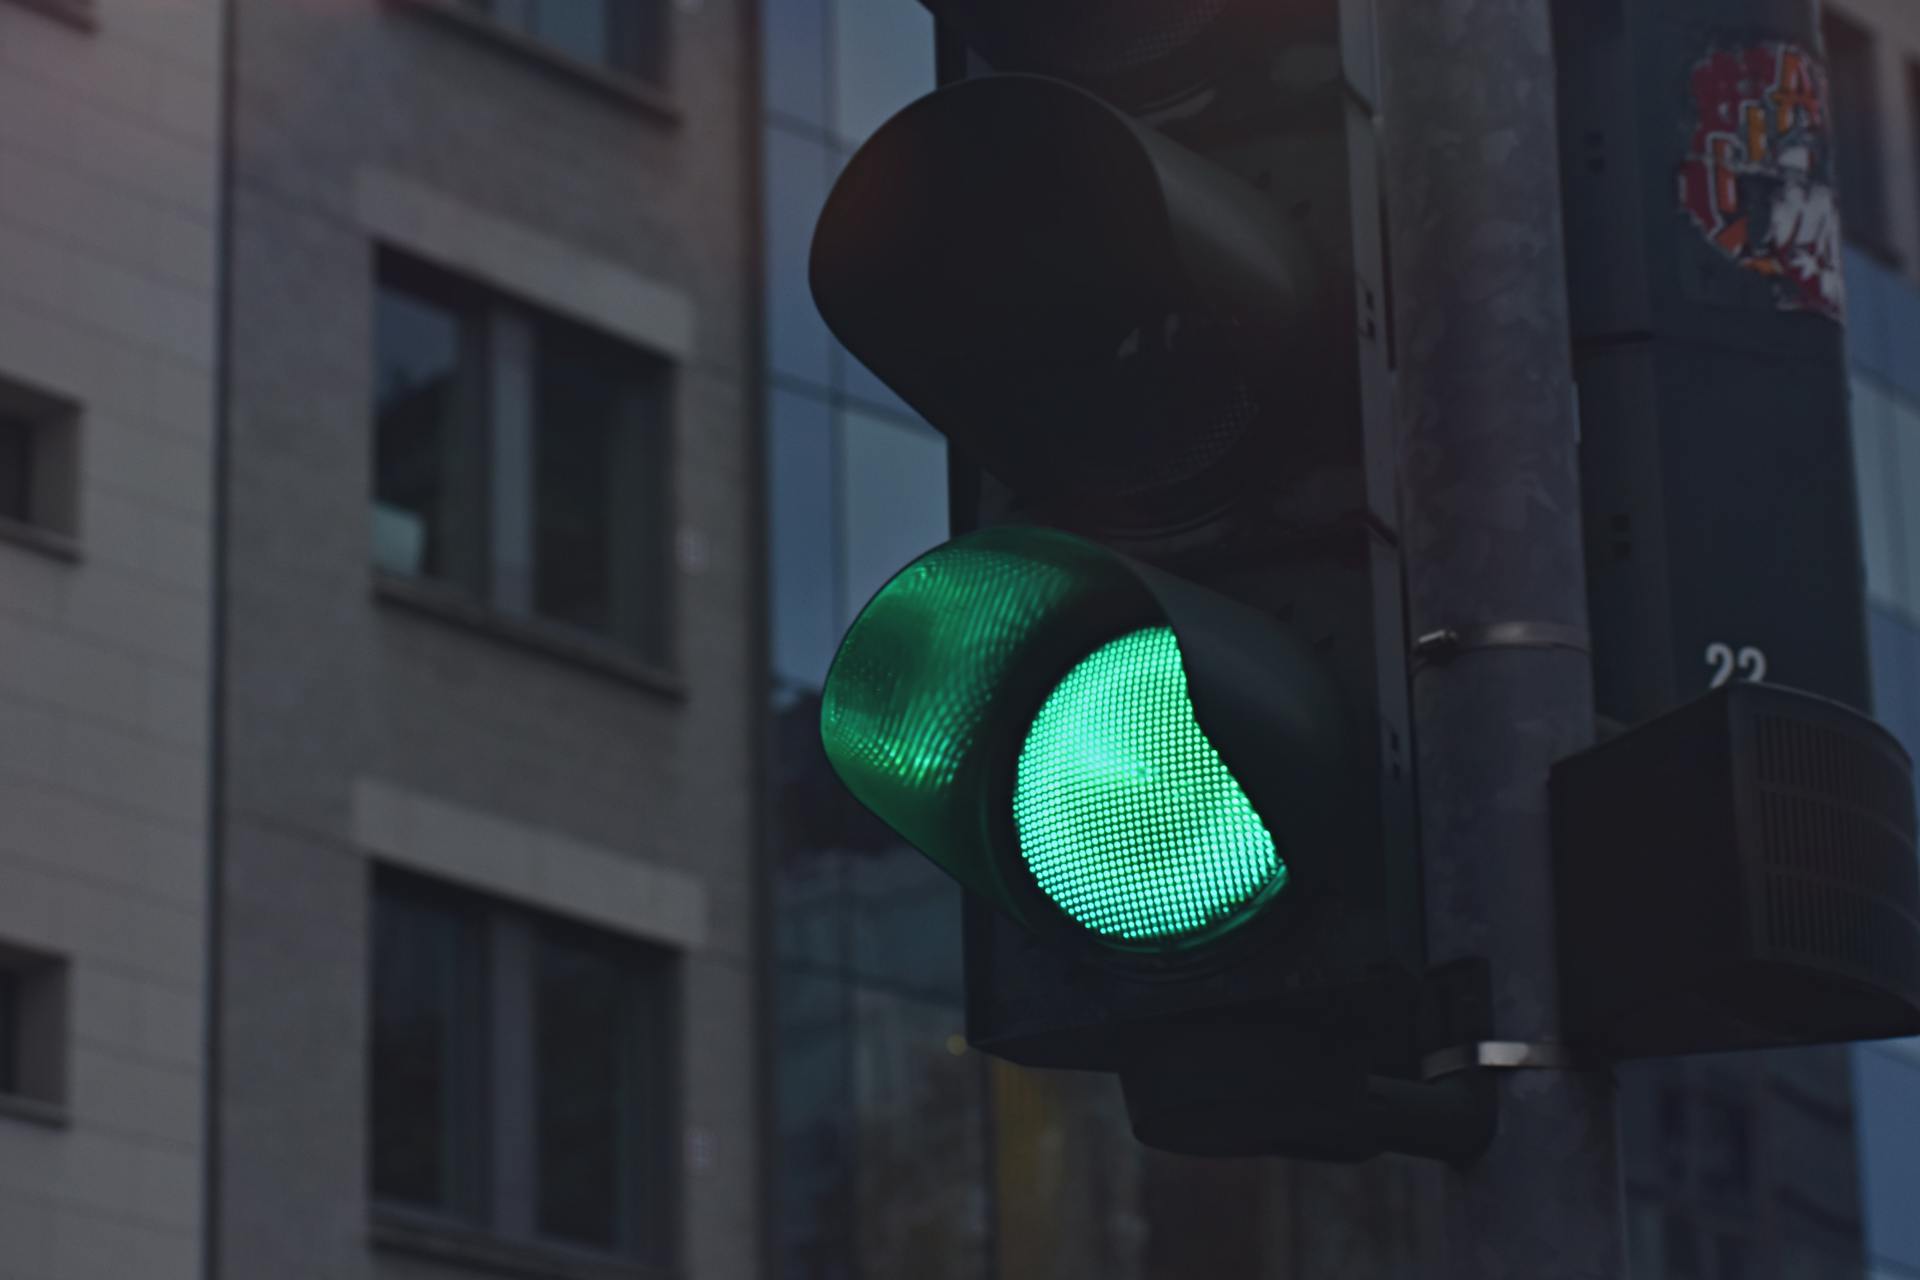 A traffic light displaying a green signal | Source: Pexels